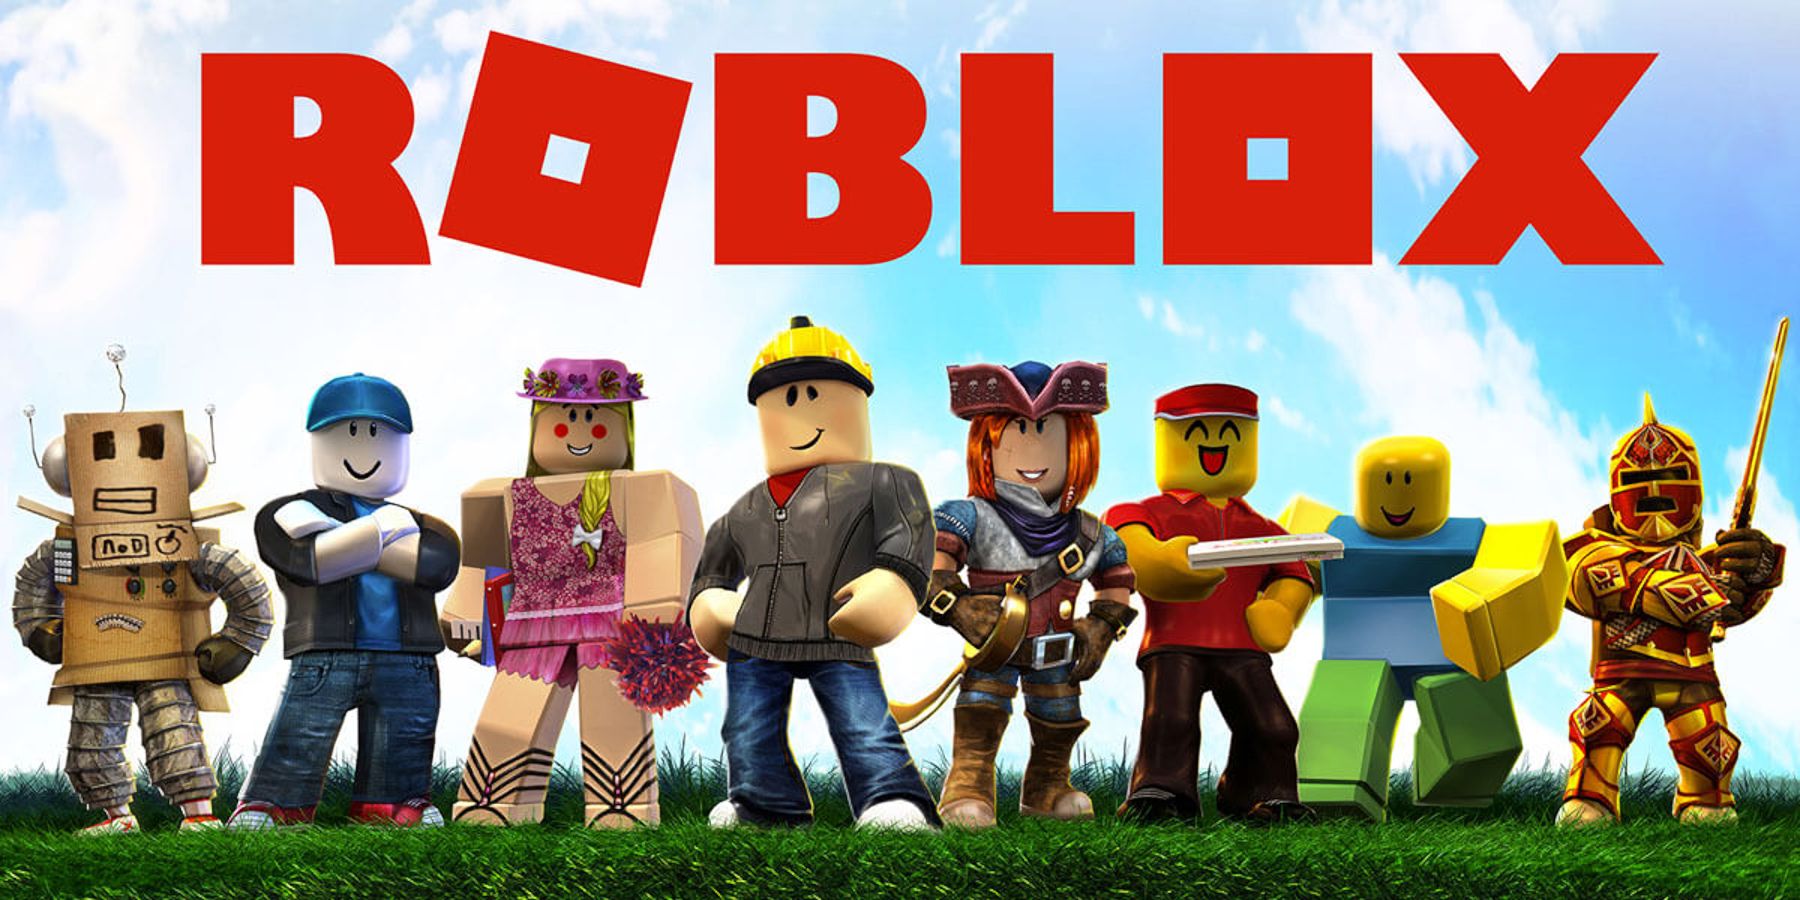 When Is Roblox Coming To VR? Answered